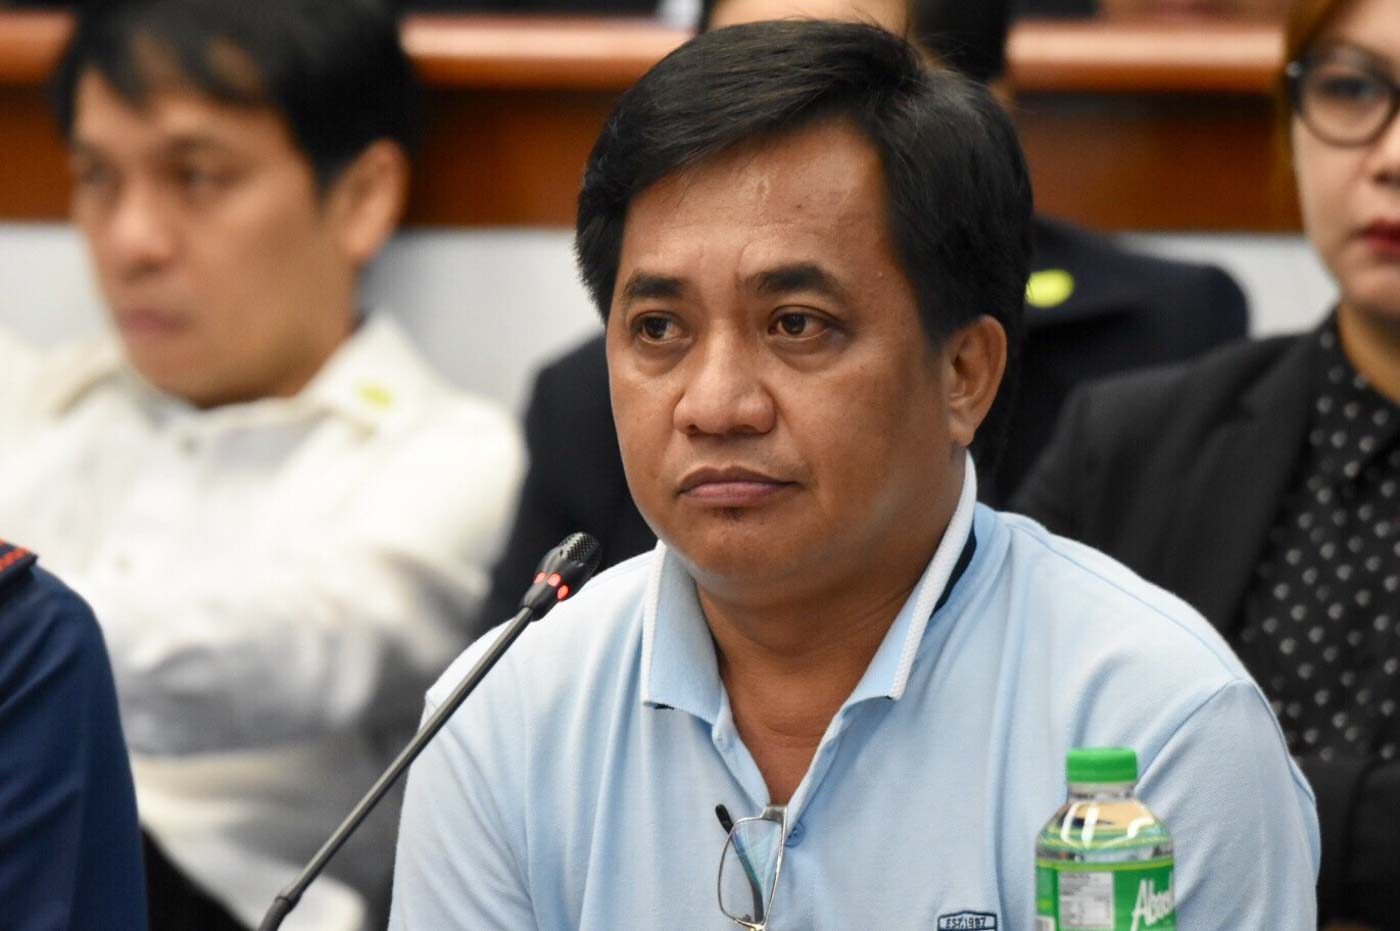 PNP plans to take Jimmy Guban from Senate without arrest warrant